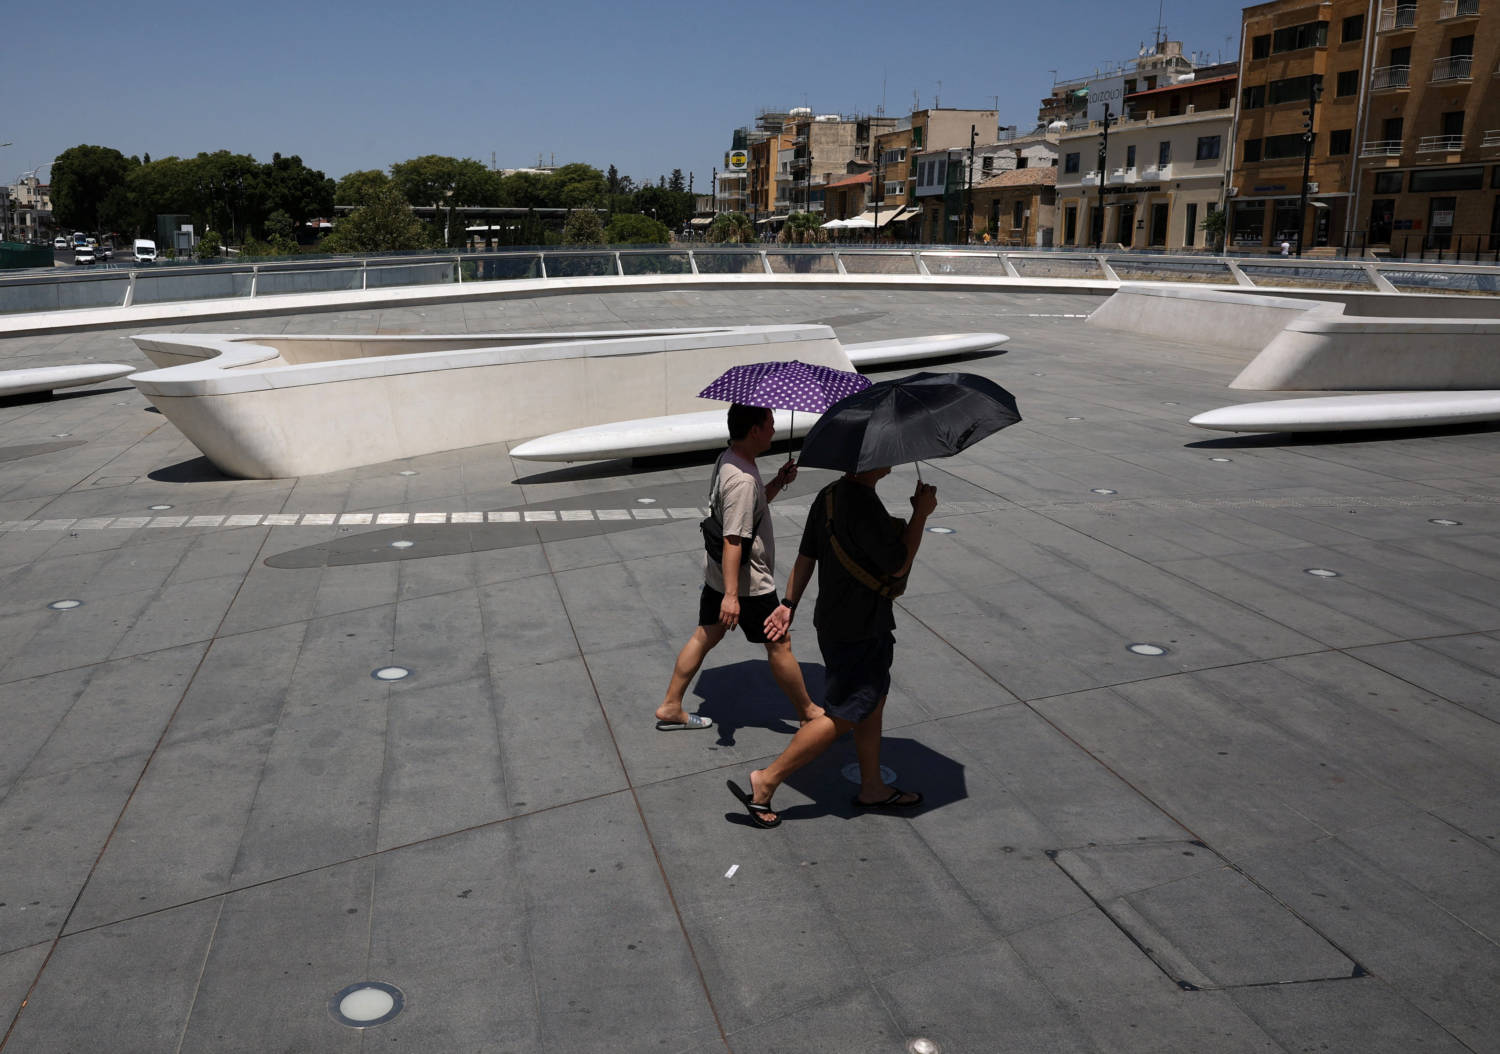 Men Shelter From The Sun With An Umbrella During A Heatwave In Nicosia